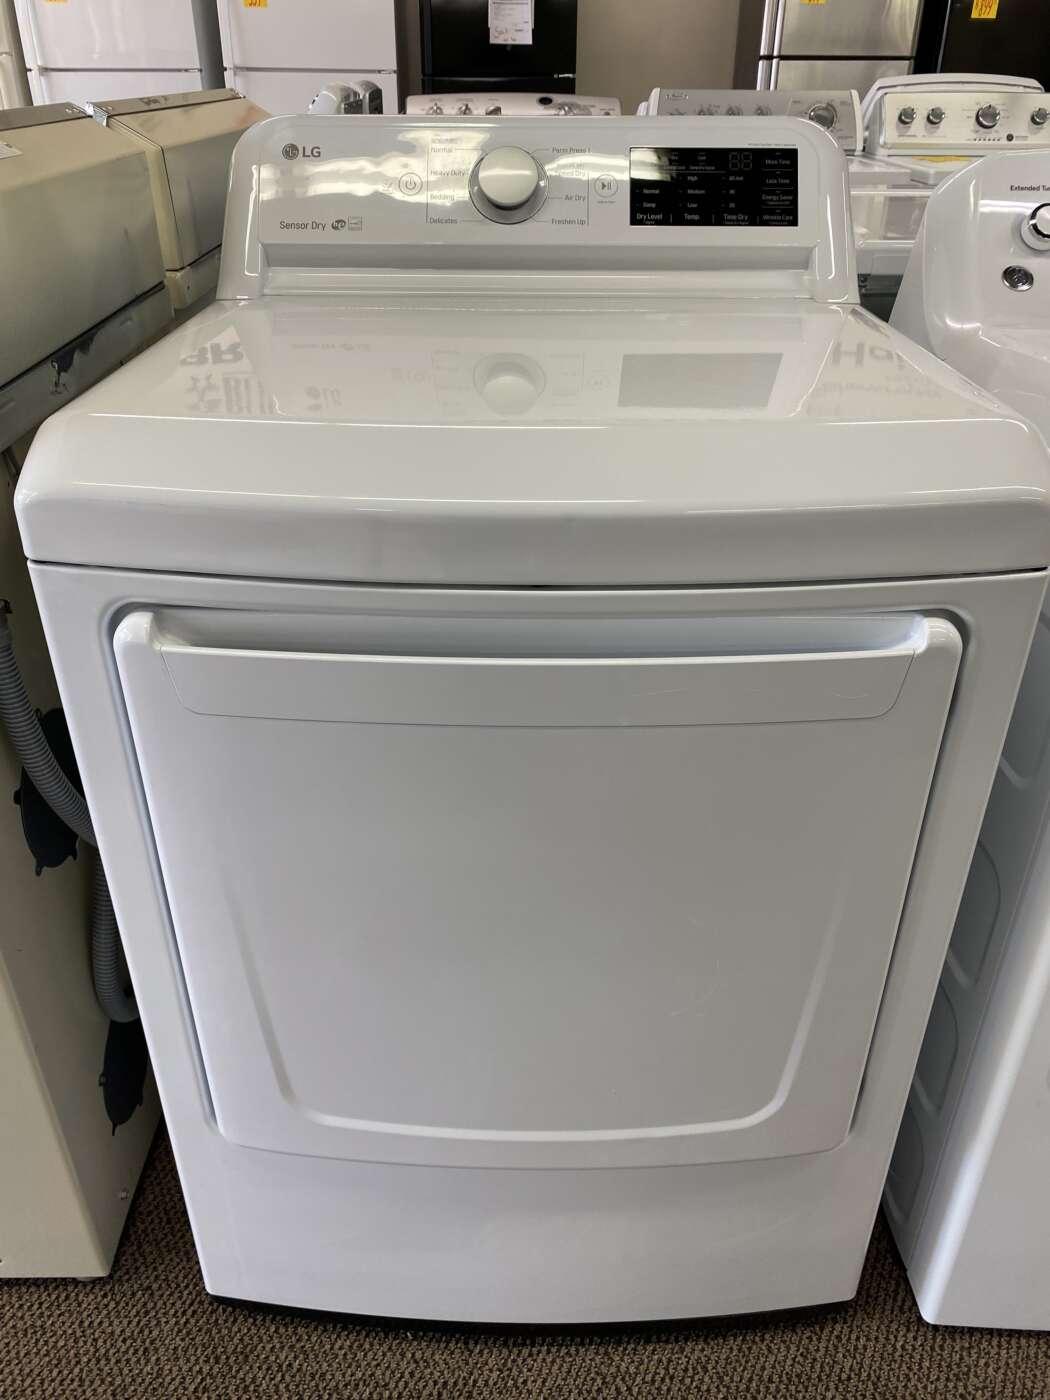 Reconditioned L/G 7.3 Cu. Ft. Electric Dryer – White